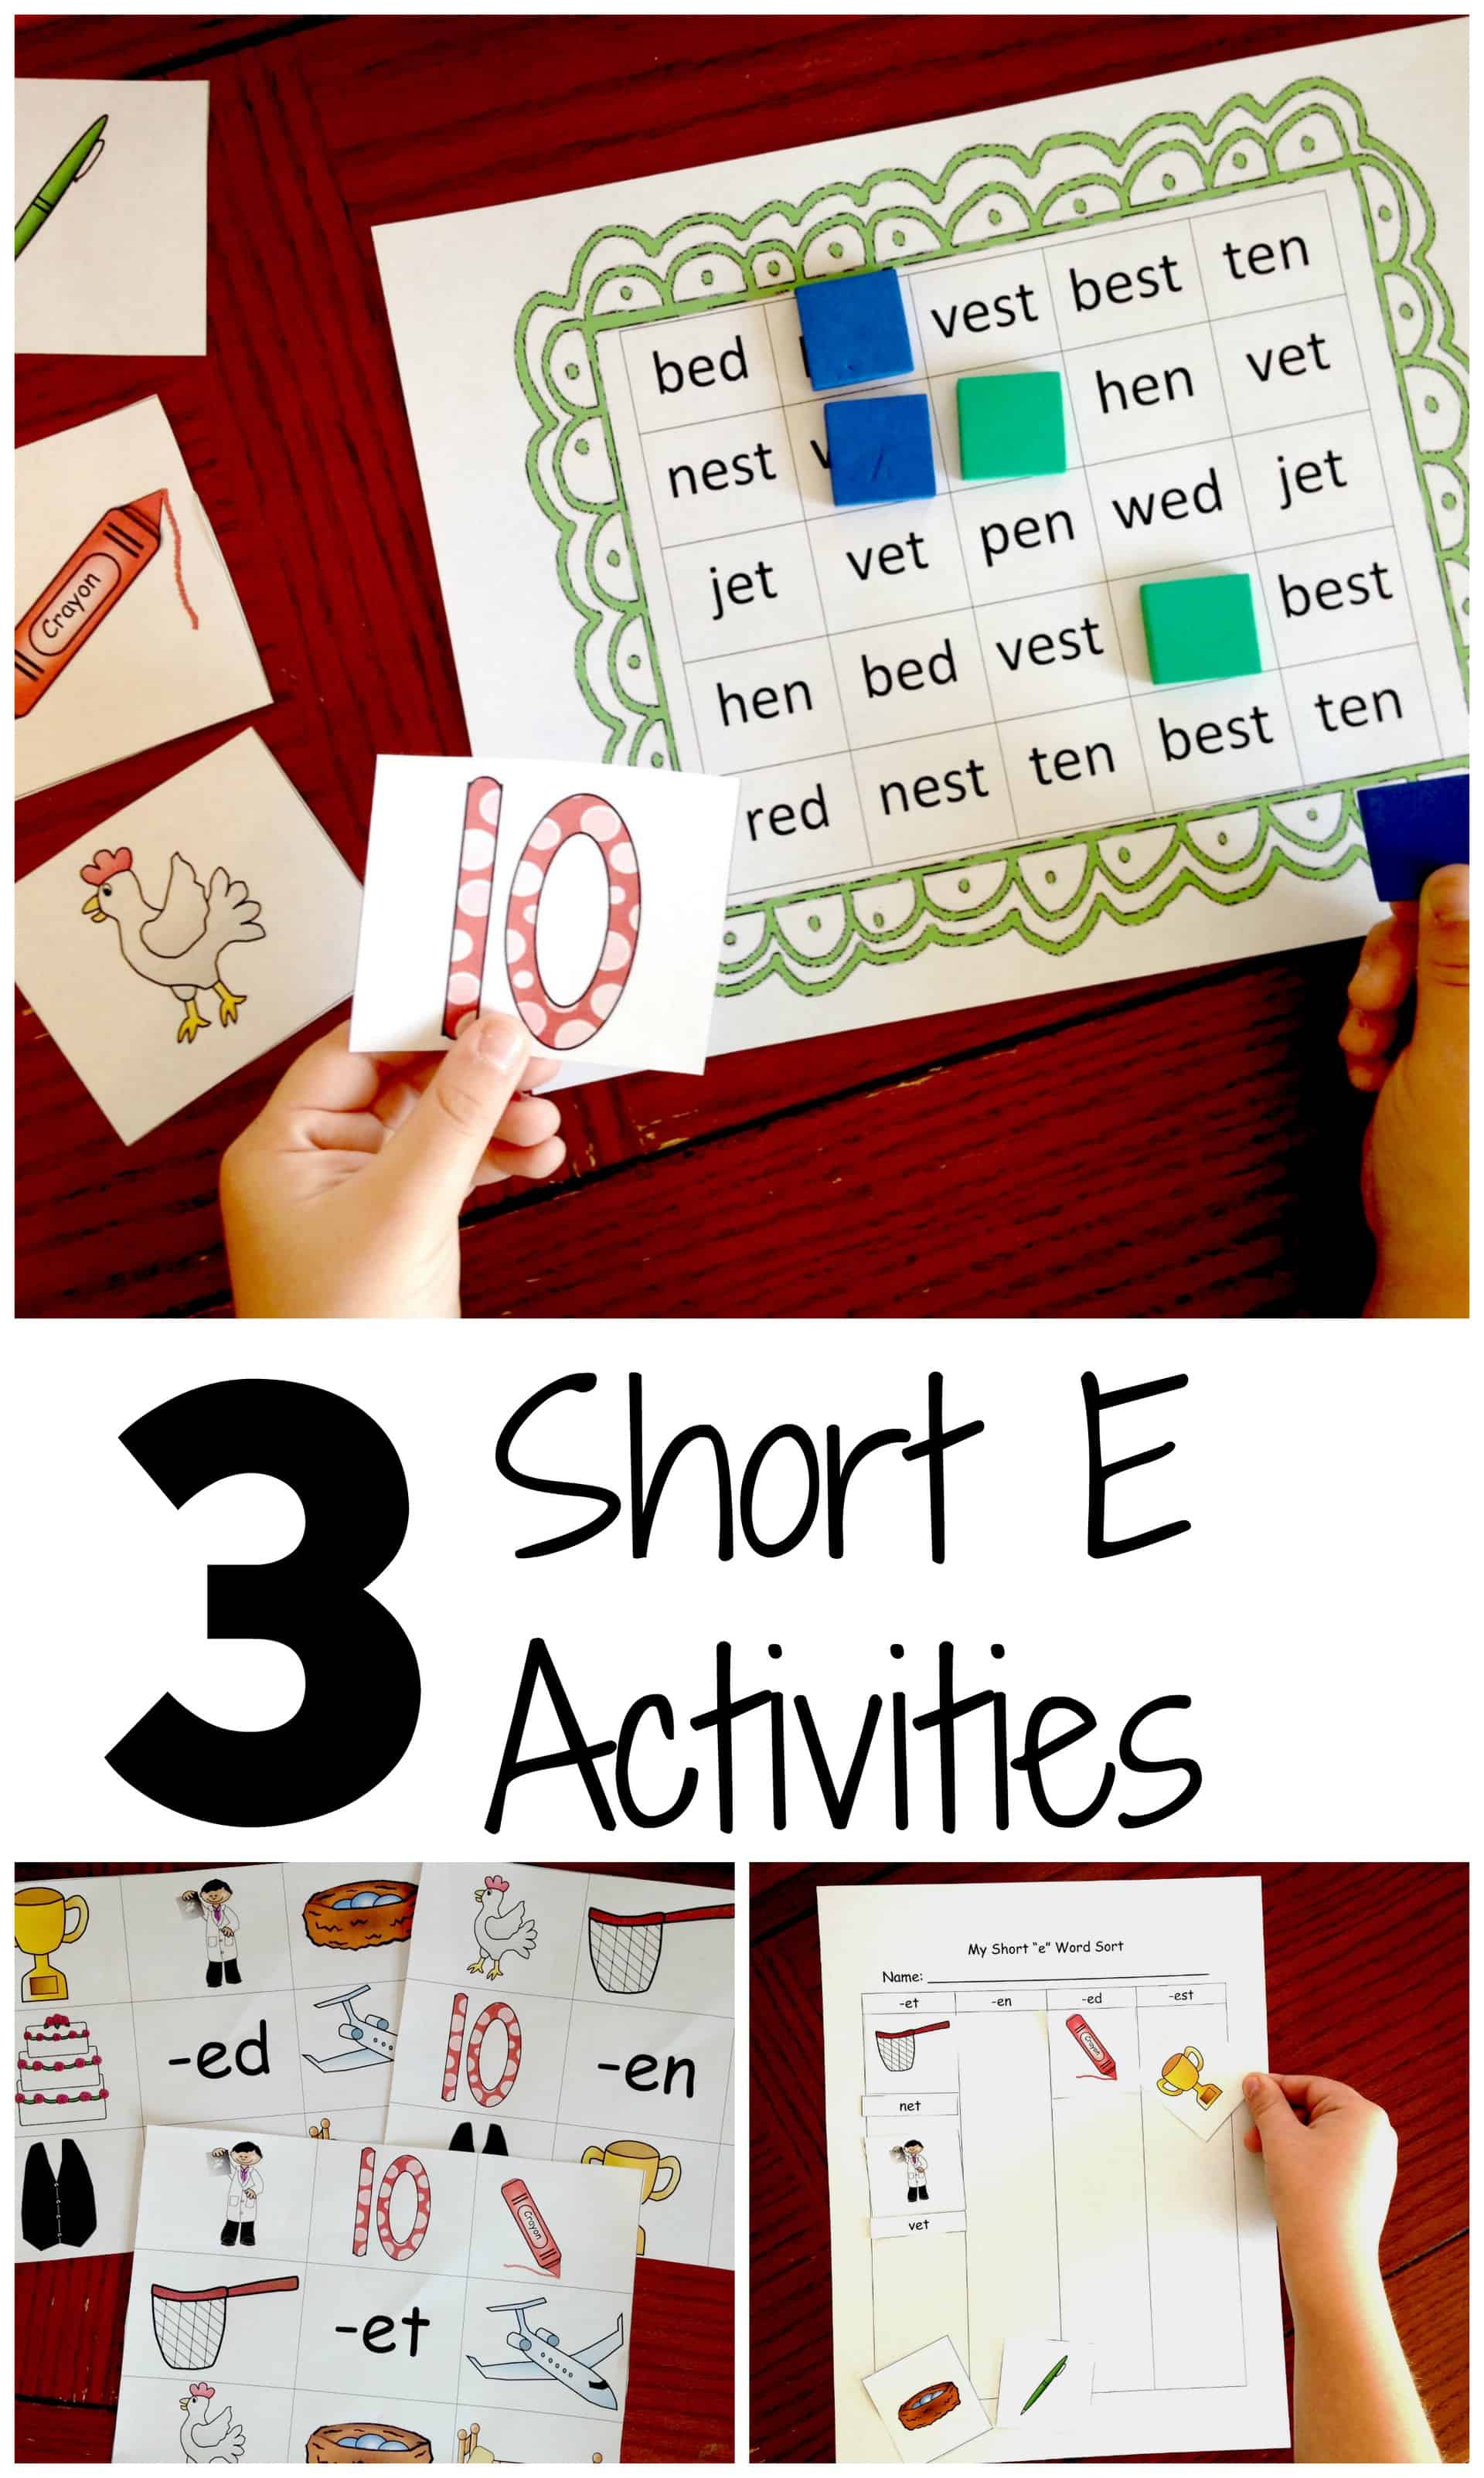 Short e word activities with playing cards, and little children's hands, on a wooden table. 